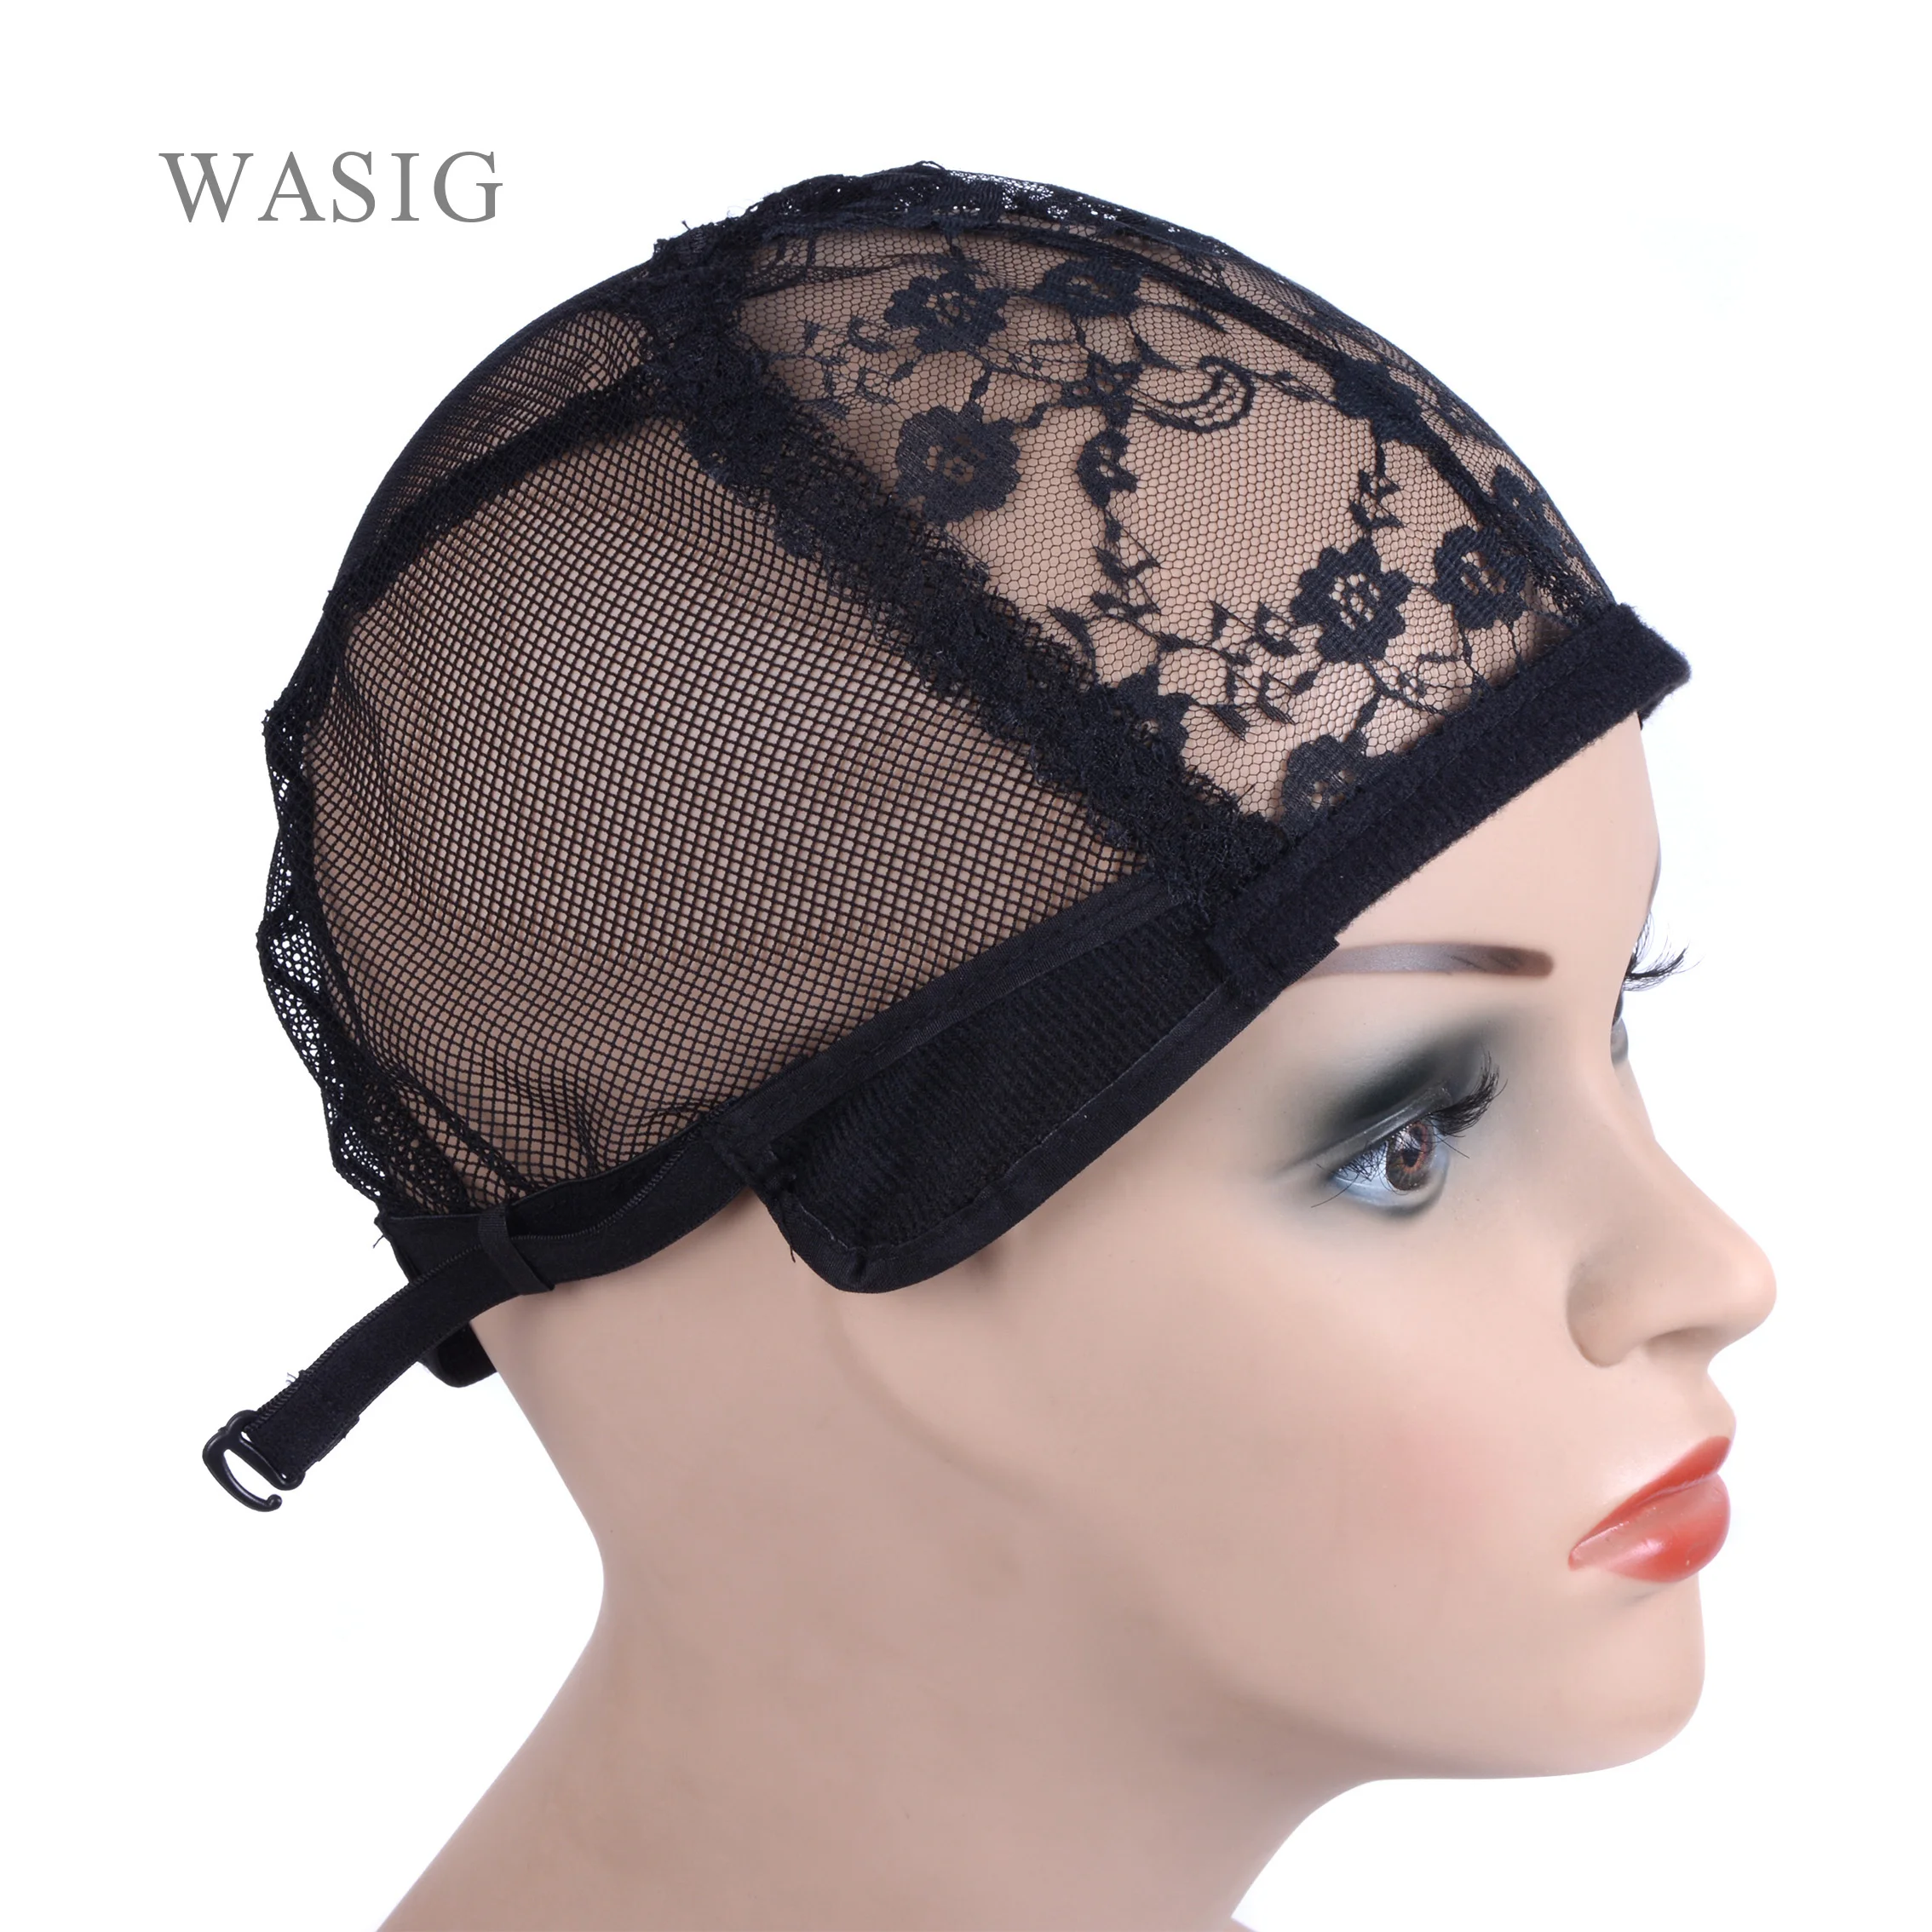 Black 5pcs  Wig Cap for Making Wigs with Adjustable Strap on the Back Weaving Cap  Glueless Wig Caps Good Quality Hair Net Black